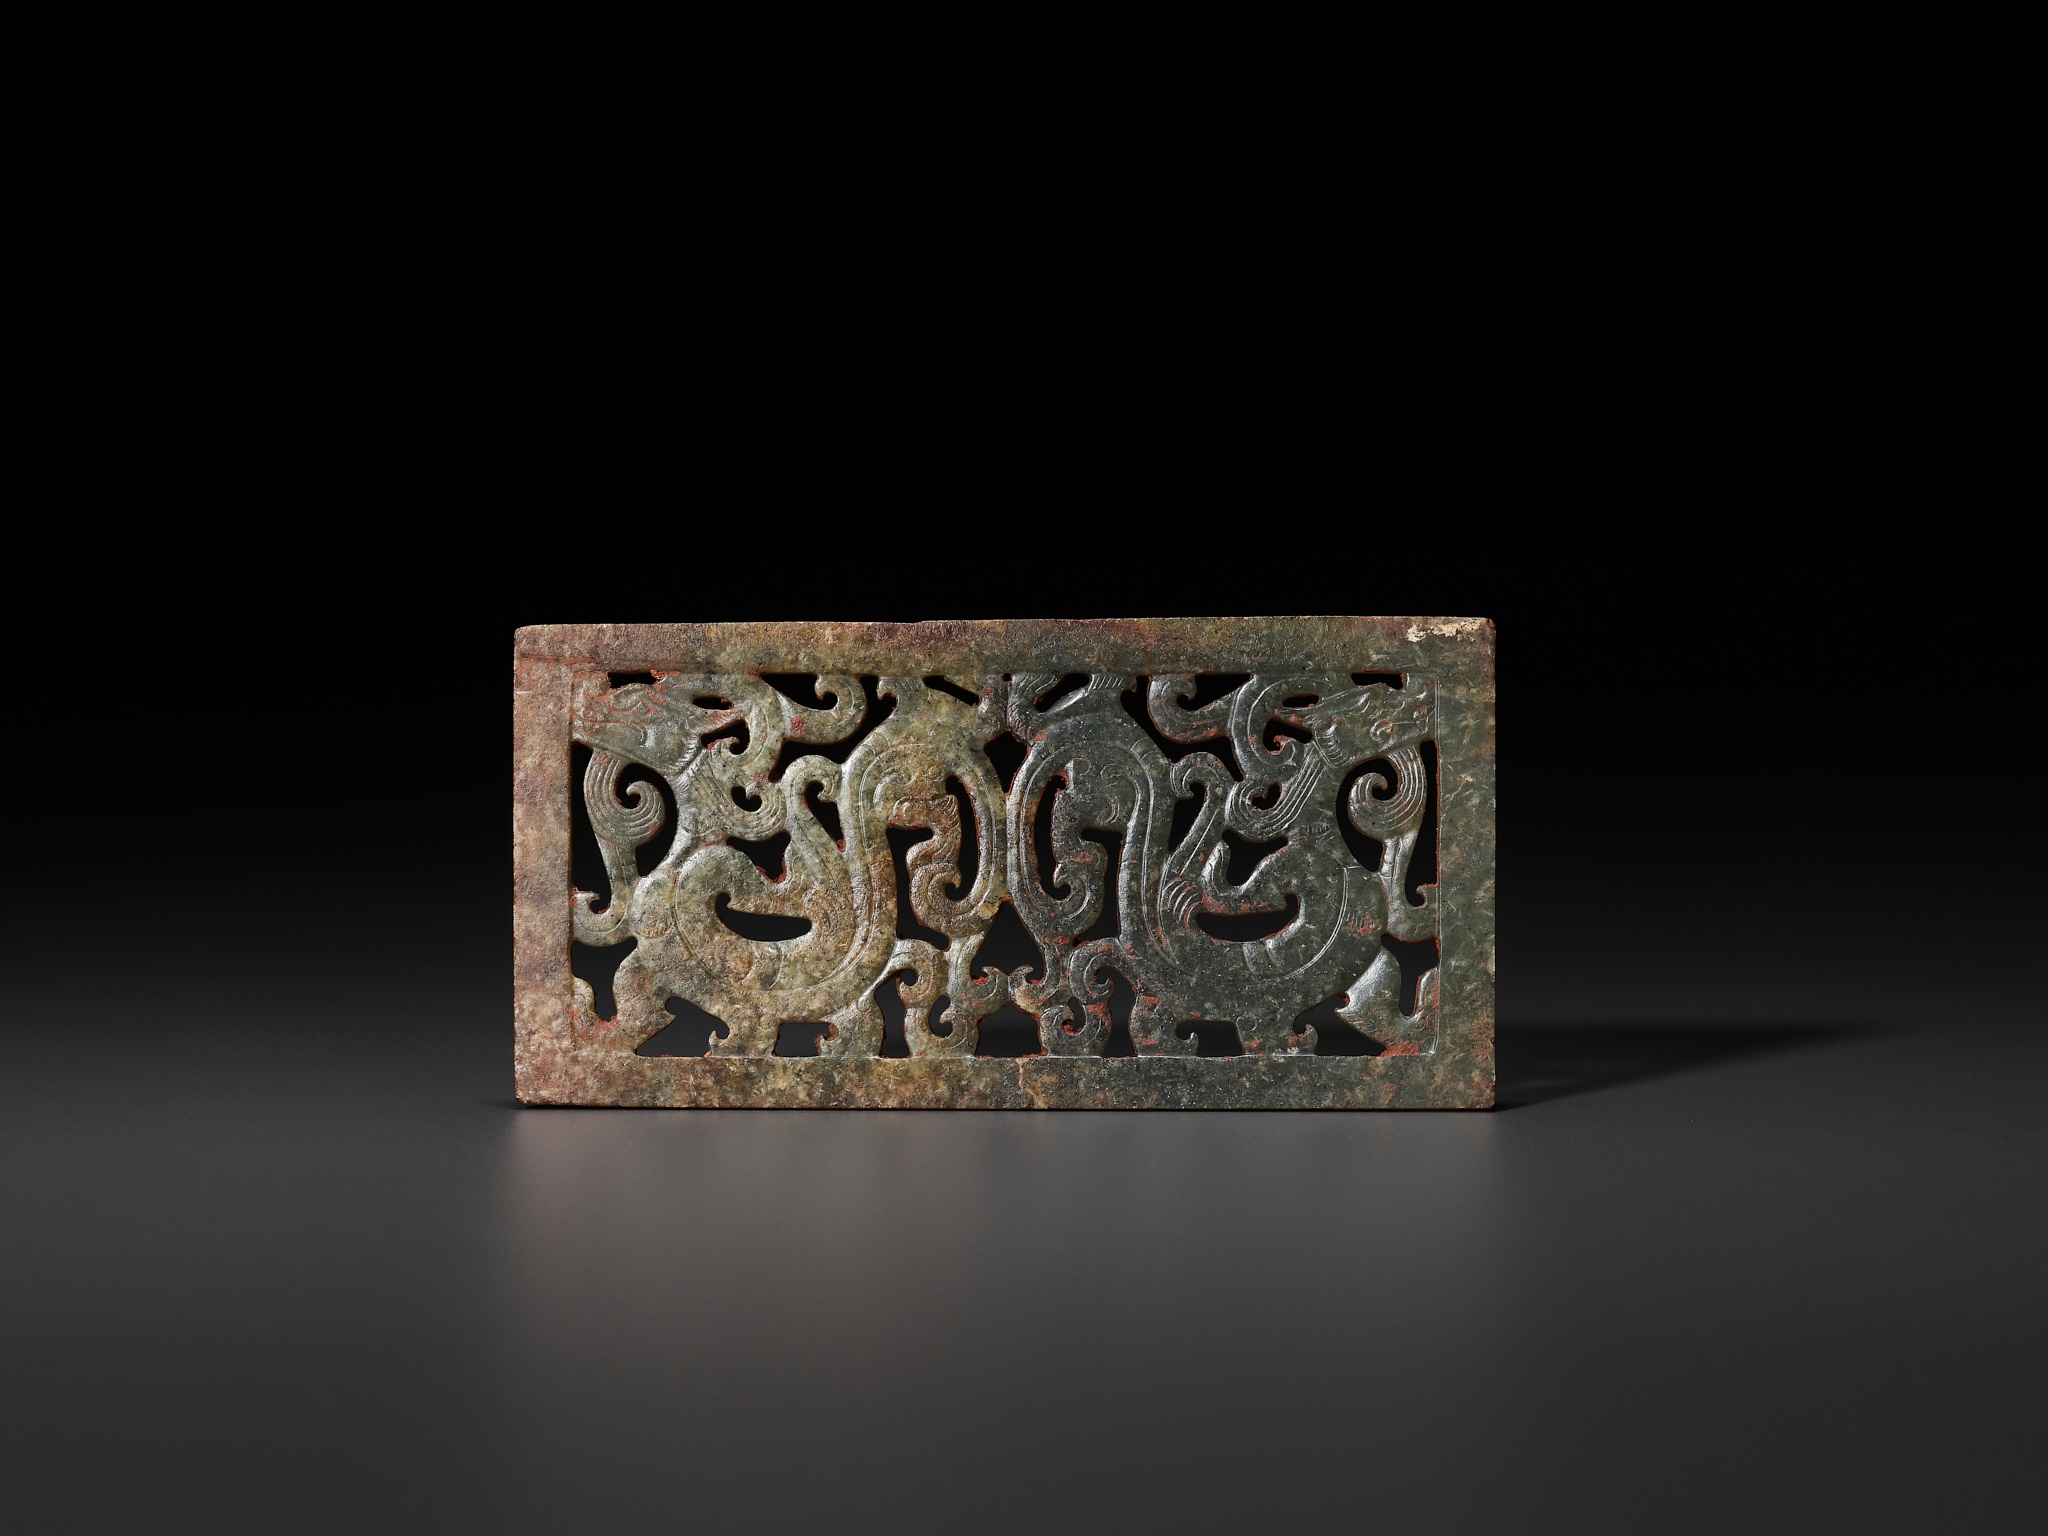 A RECTANGULAR GREEN JADE 'DOUBLE DRAGON' PLAQUE, LATE WARRING STATES PERIOD TO EARLY WESTERN HAN DYN - Image 2 of 12